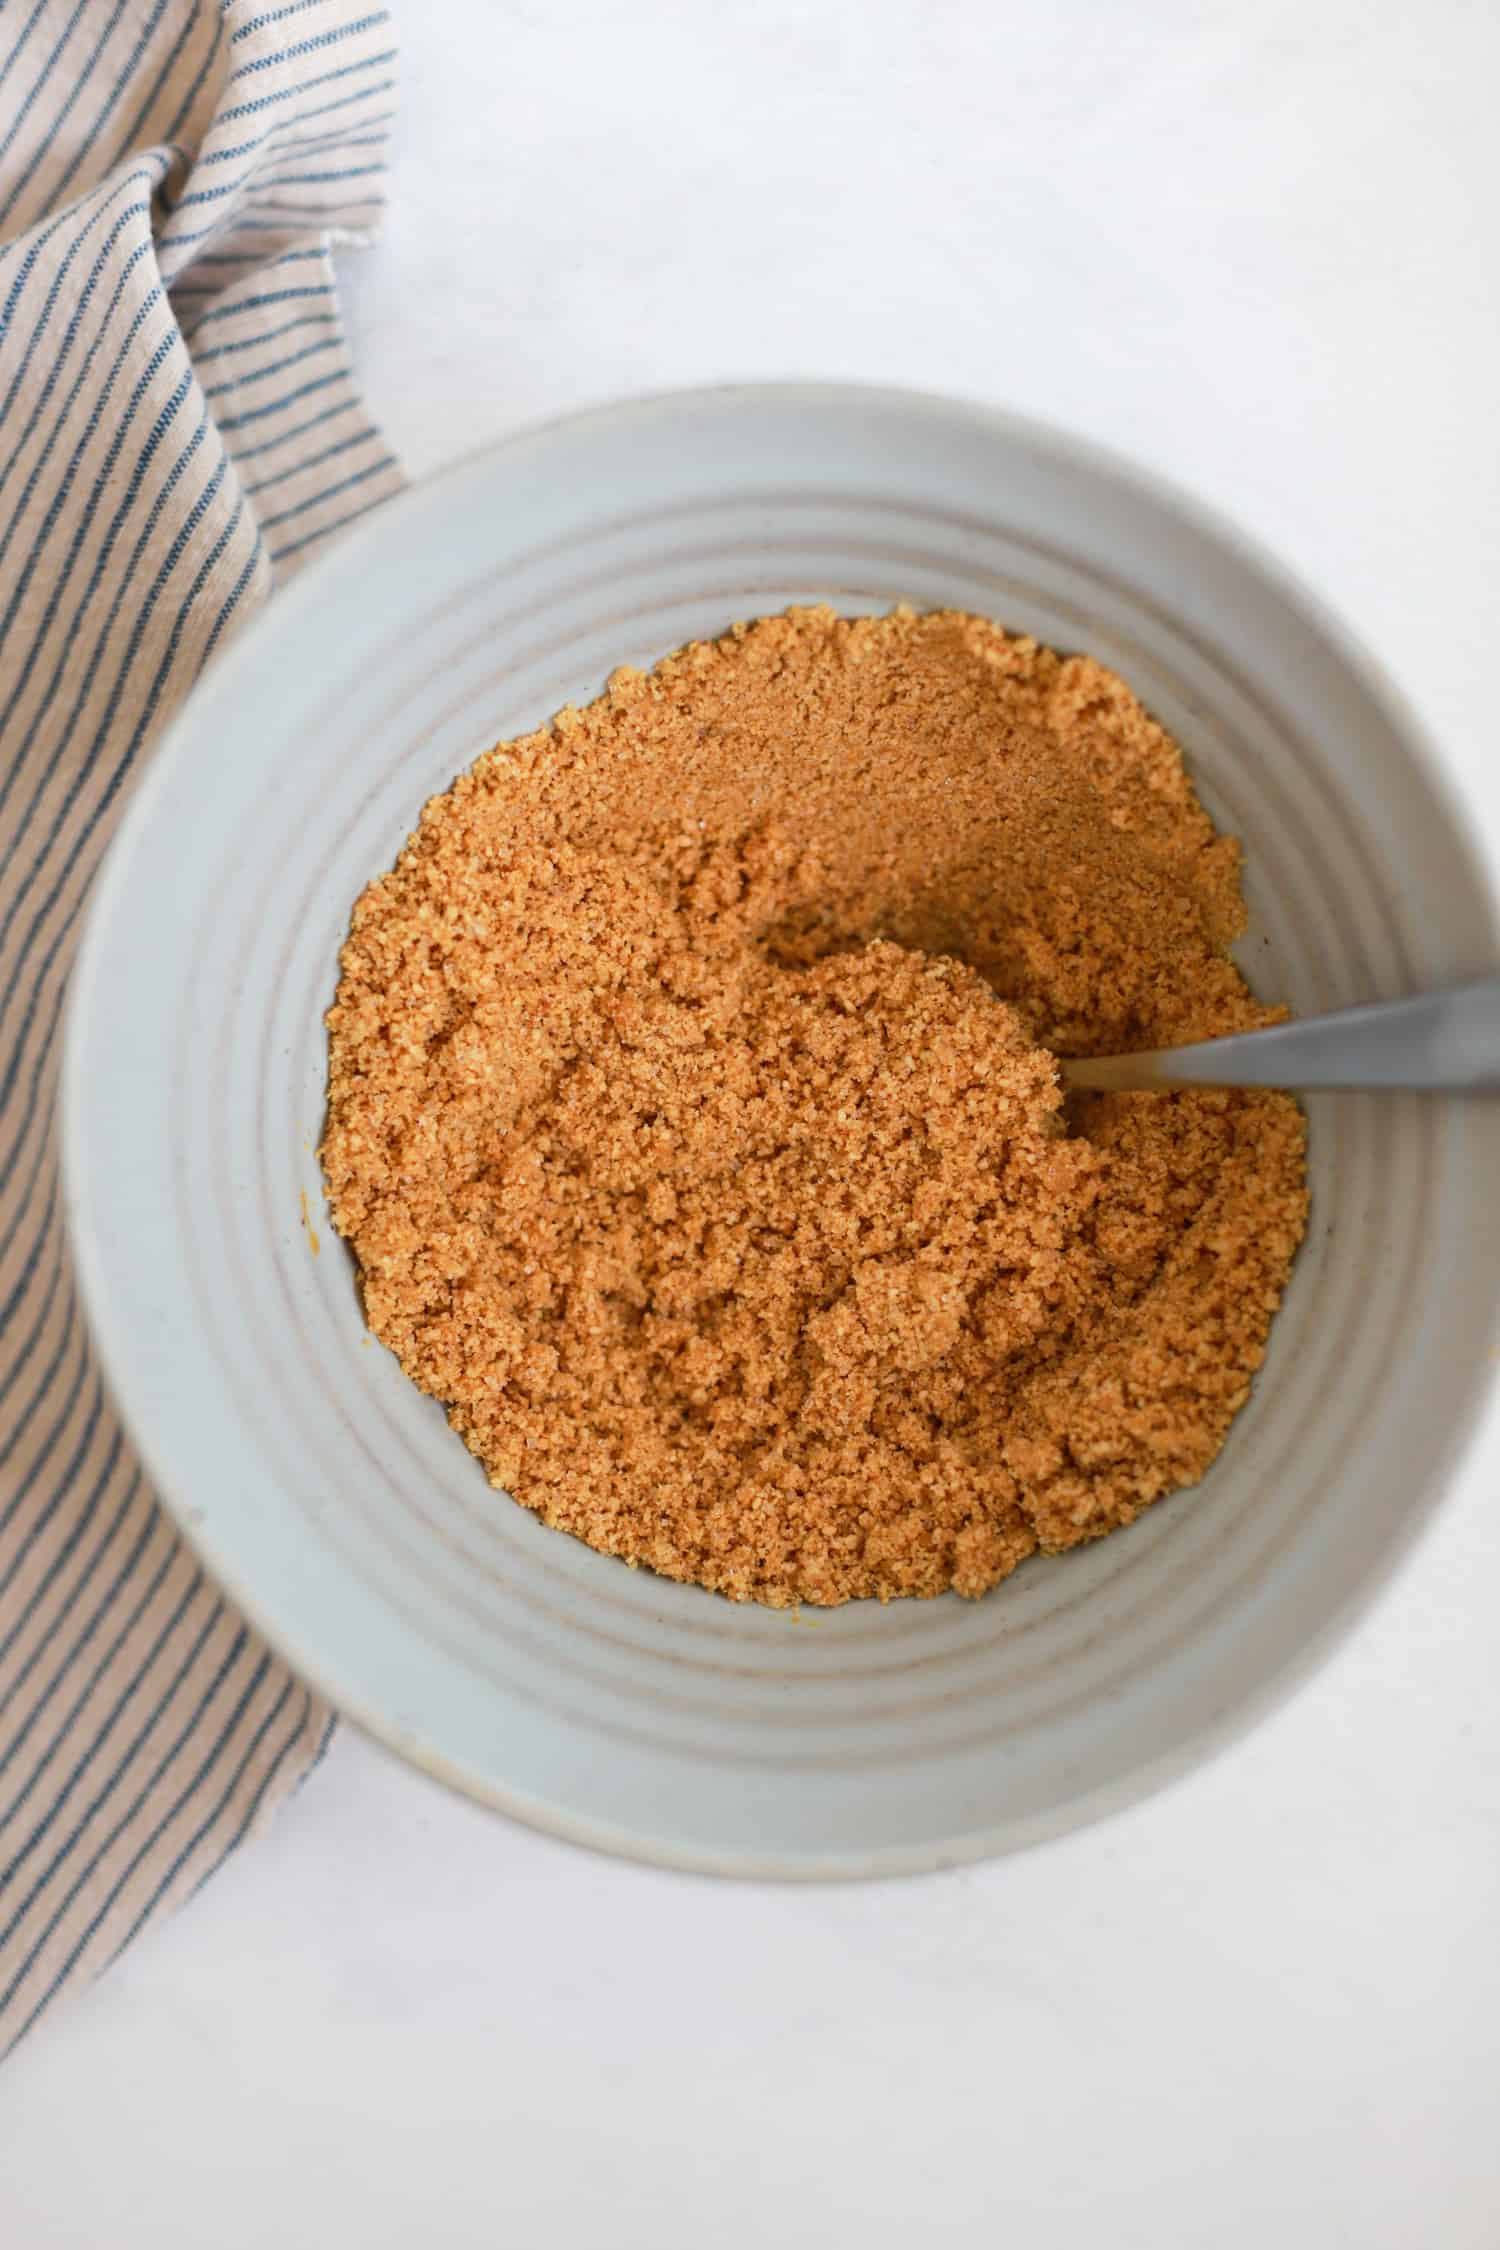 Ingredients for graham cracker crust in a ceramic mixing bowl.